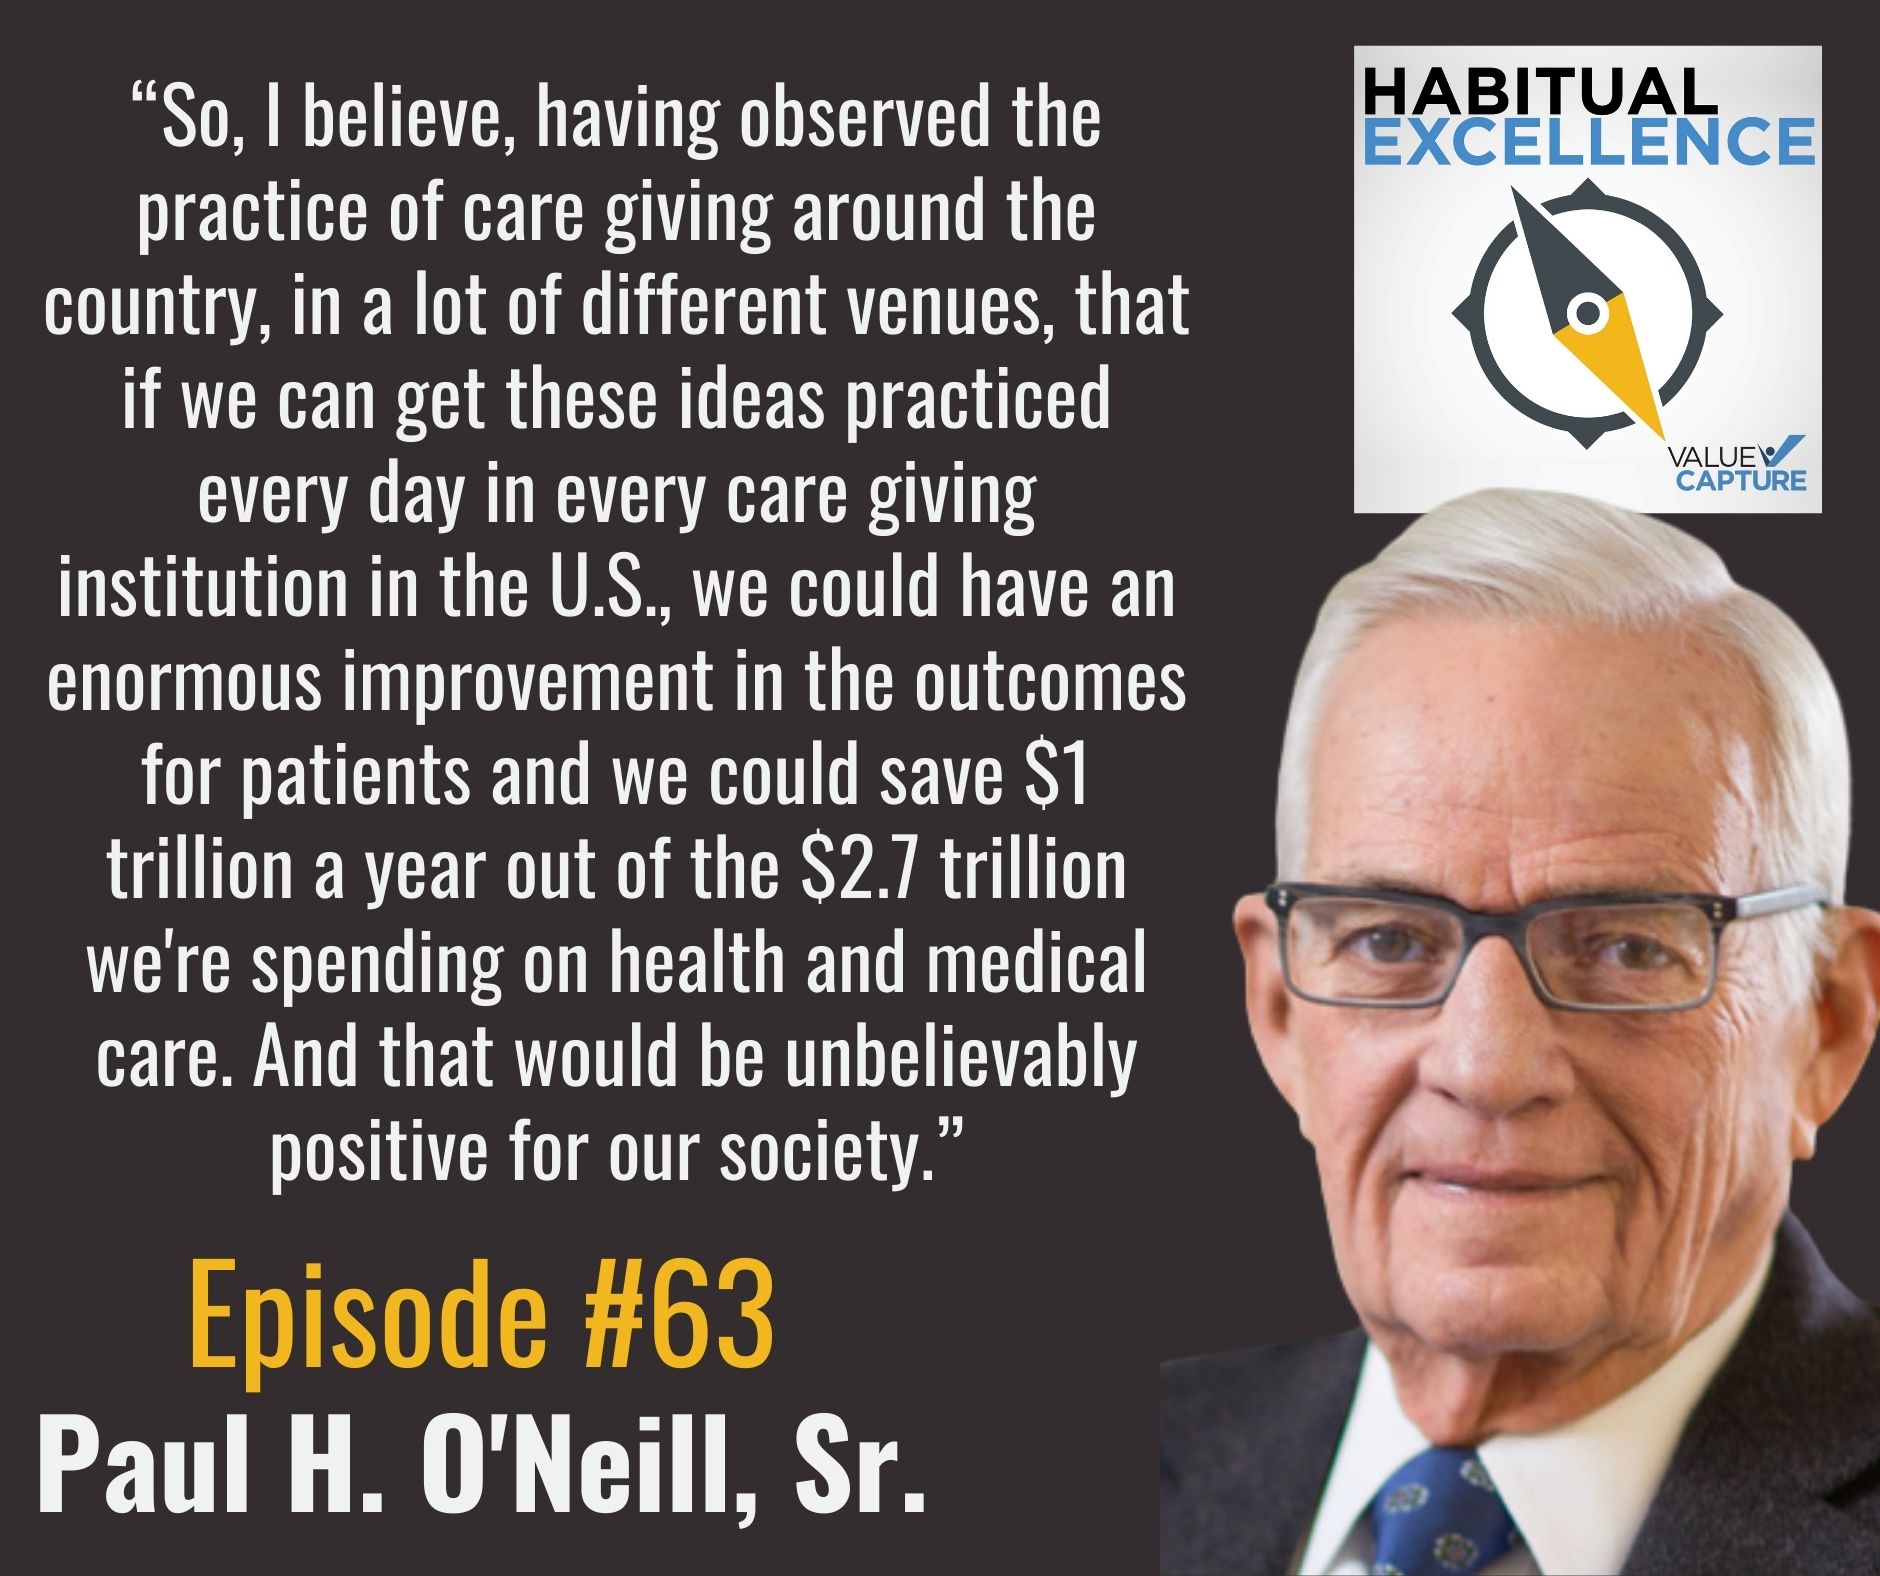 “So, I believe, having observed the practice of care giving around the country, in a lot of different venues, that if we can get these ideas practiced every day in every care giving institution in the U.S., we could have an enormous improvement in the outcomes for patients and we could save $1 trillion a year out of the $2.7 trillion we're spending on health and medical care. And that would be unbelievably positive for our society.”